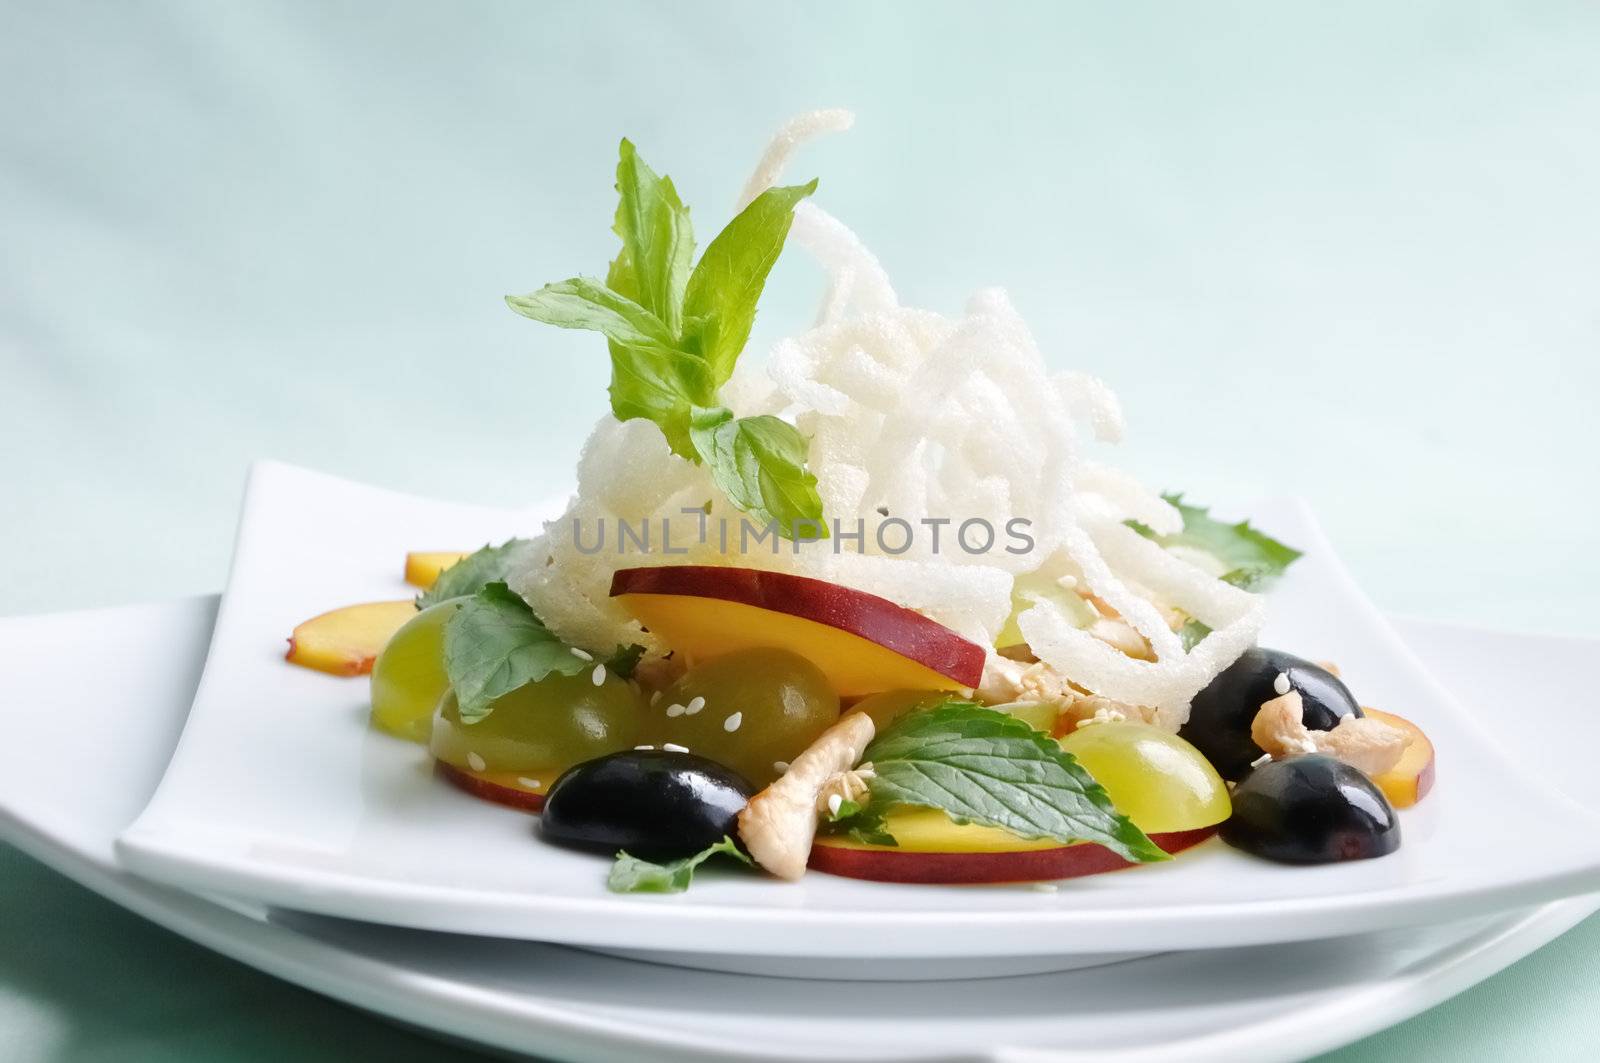 summer salad with grapes and nectarines by Apolonia